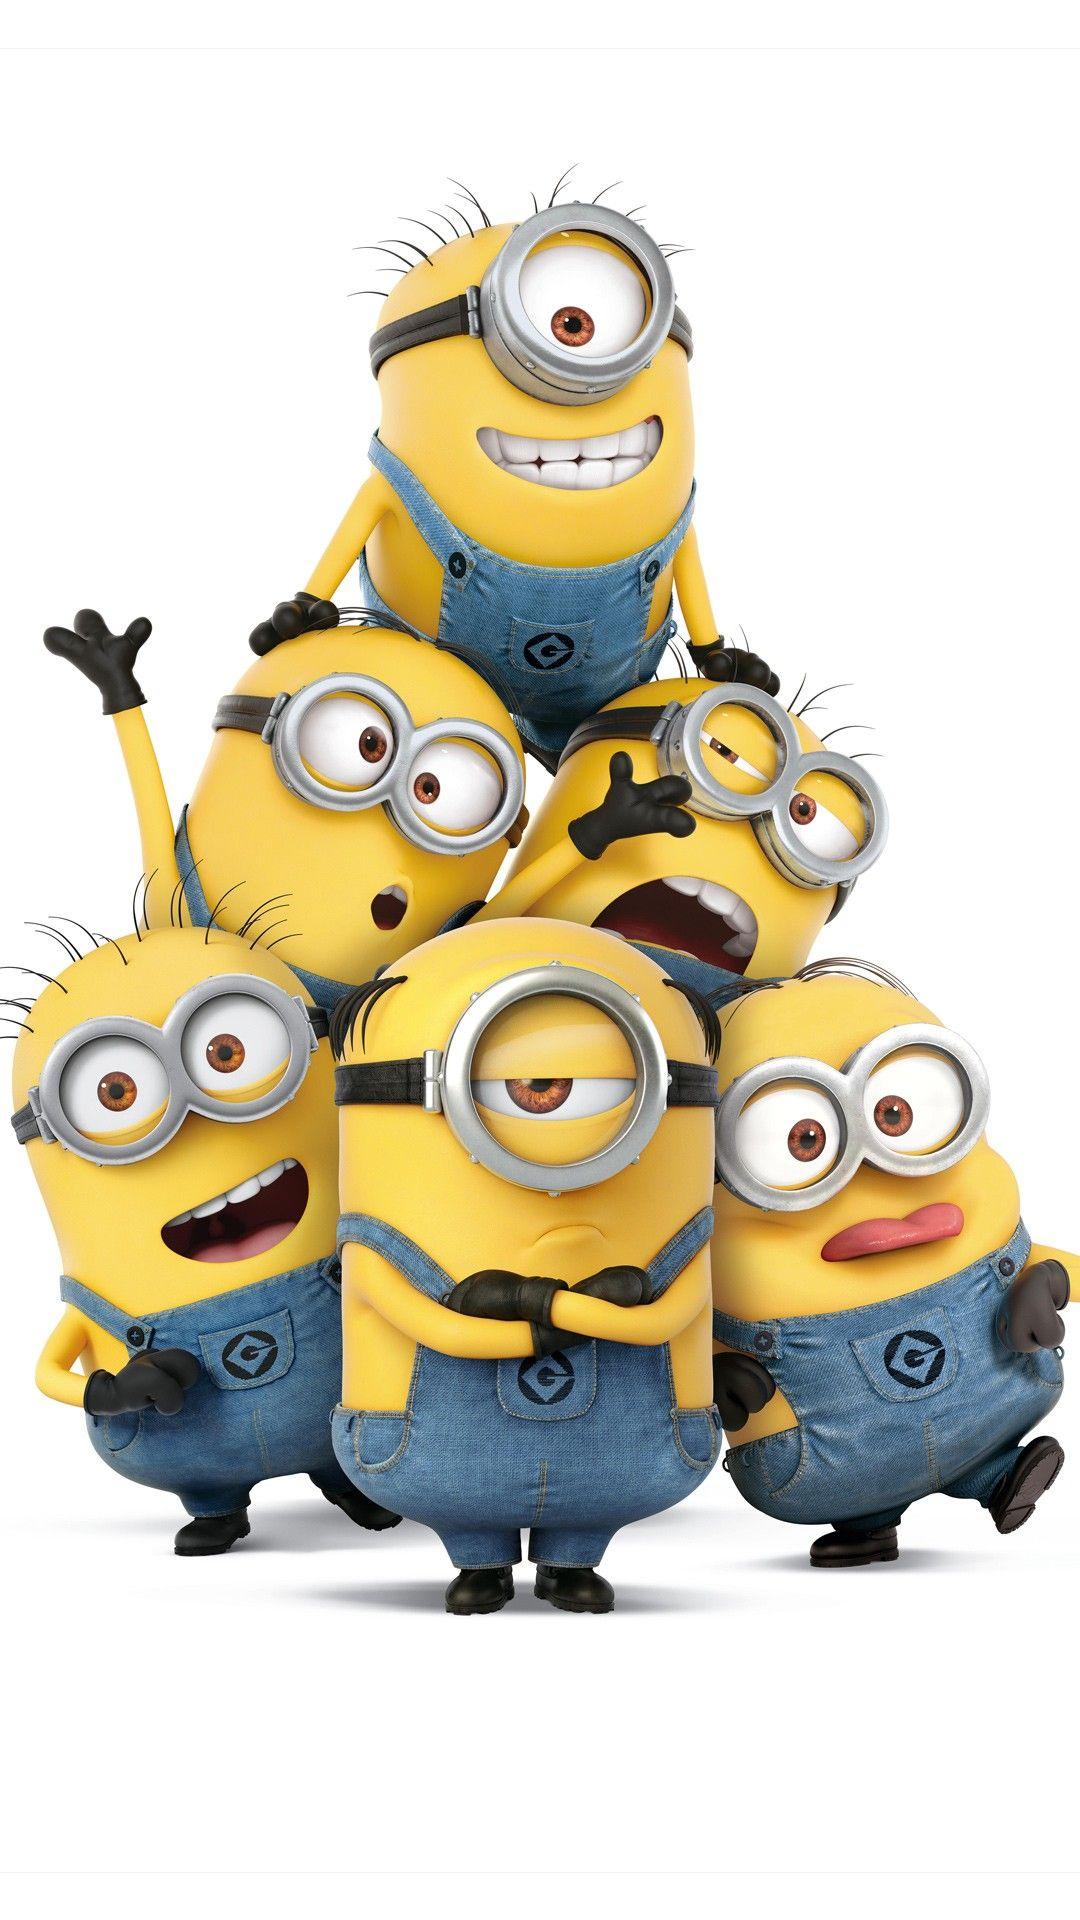 Despicable Me Minion iPhone Wallpapers - Top Free Despicable Me Minion